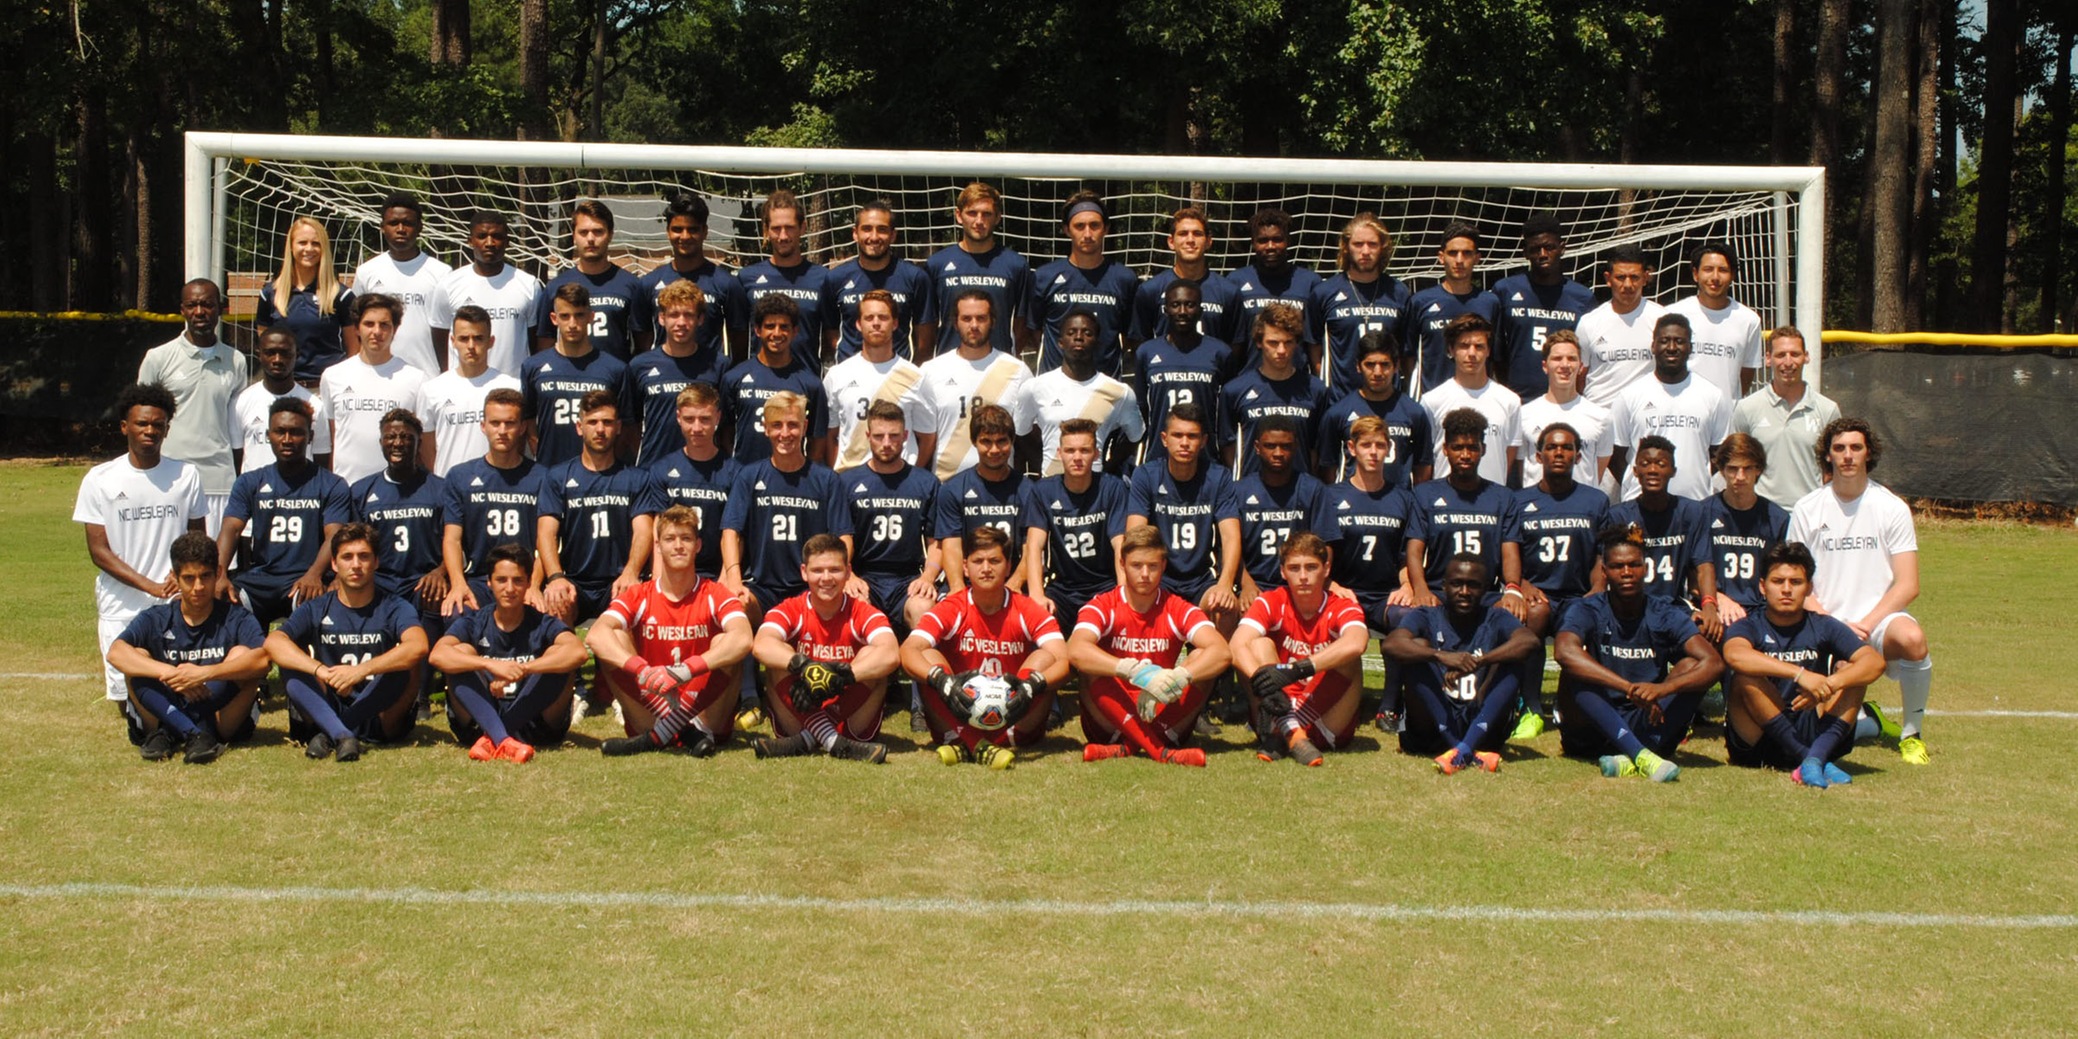 Men's Soccer suffers tough loss in USA South Semifinals; Genovese named to all-tourney team